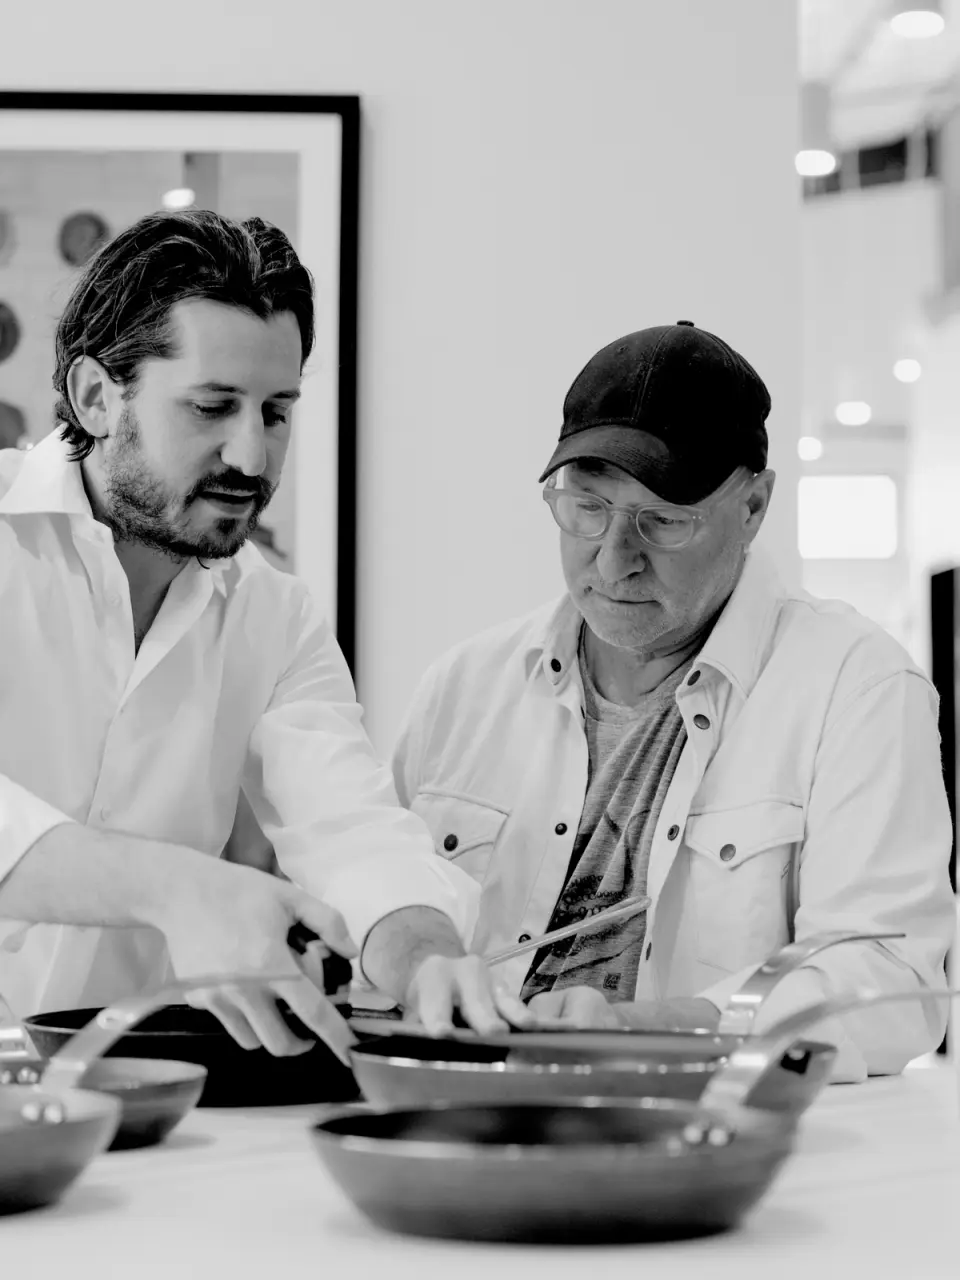 Two men, one younger with a beard and a white shirt, and an older man wearing a cap, are intently focused on something in a pan they are both handling, in a black and white photo.